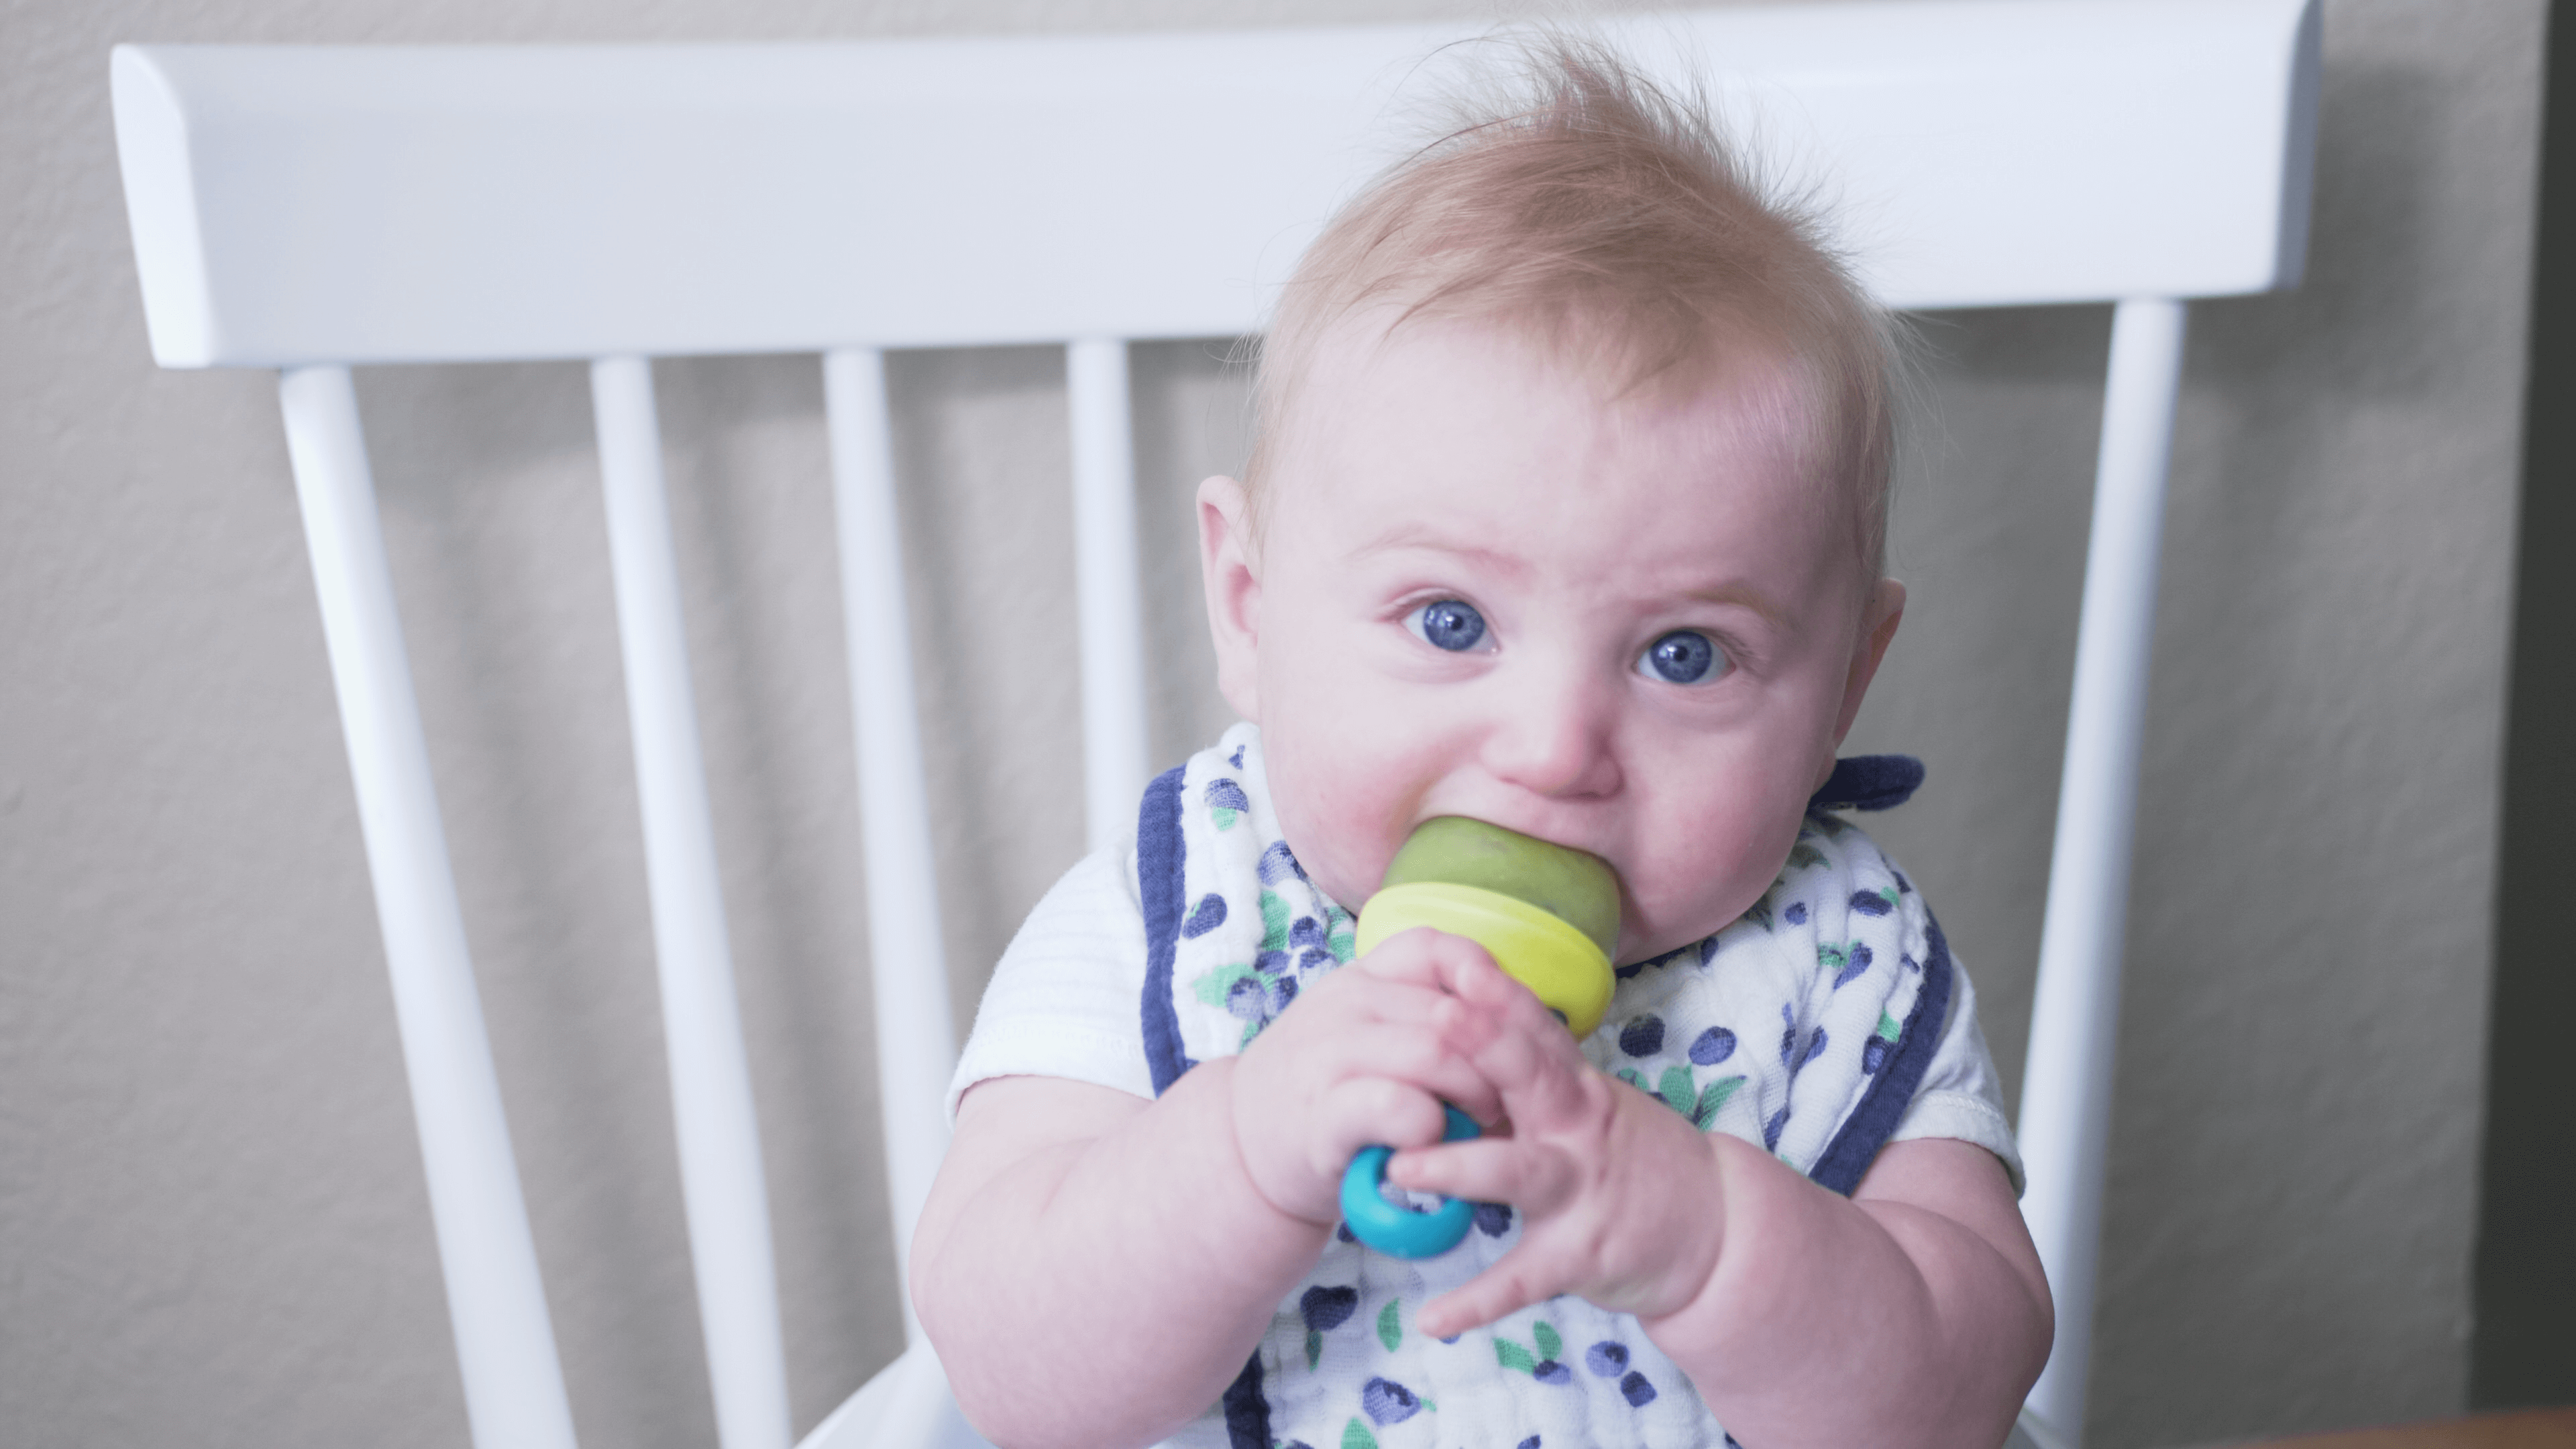 With the latest research suggesting early peanut introduction, we've rounded up 8 ways on how to feed peanut butter to baby.